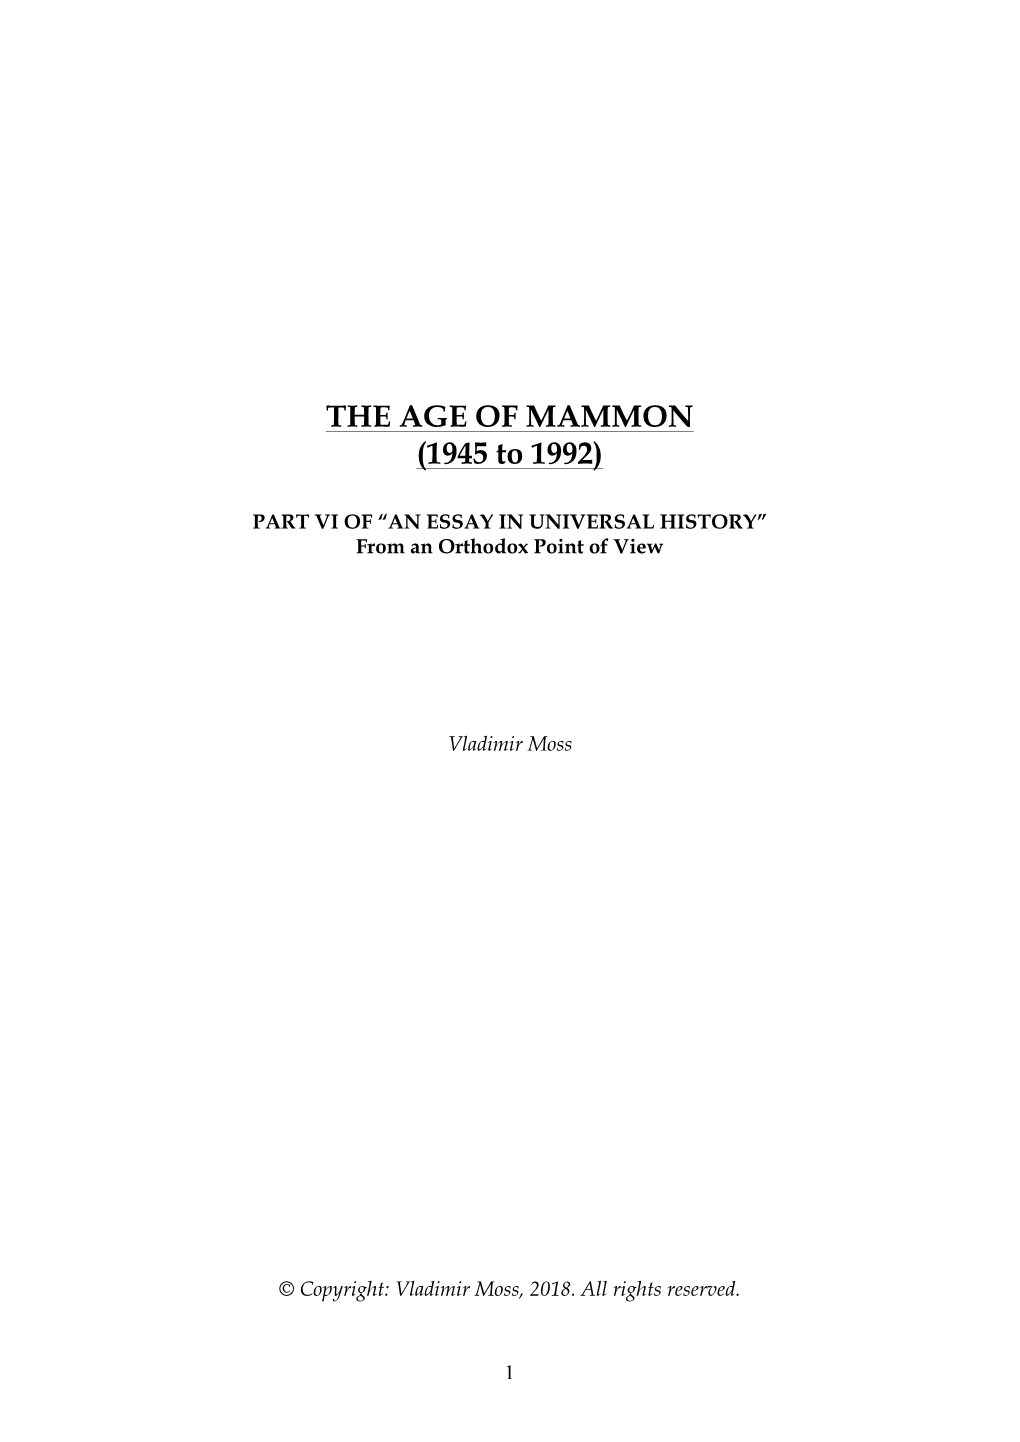 THE AGE of MAMMON (1945 to 1992)